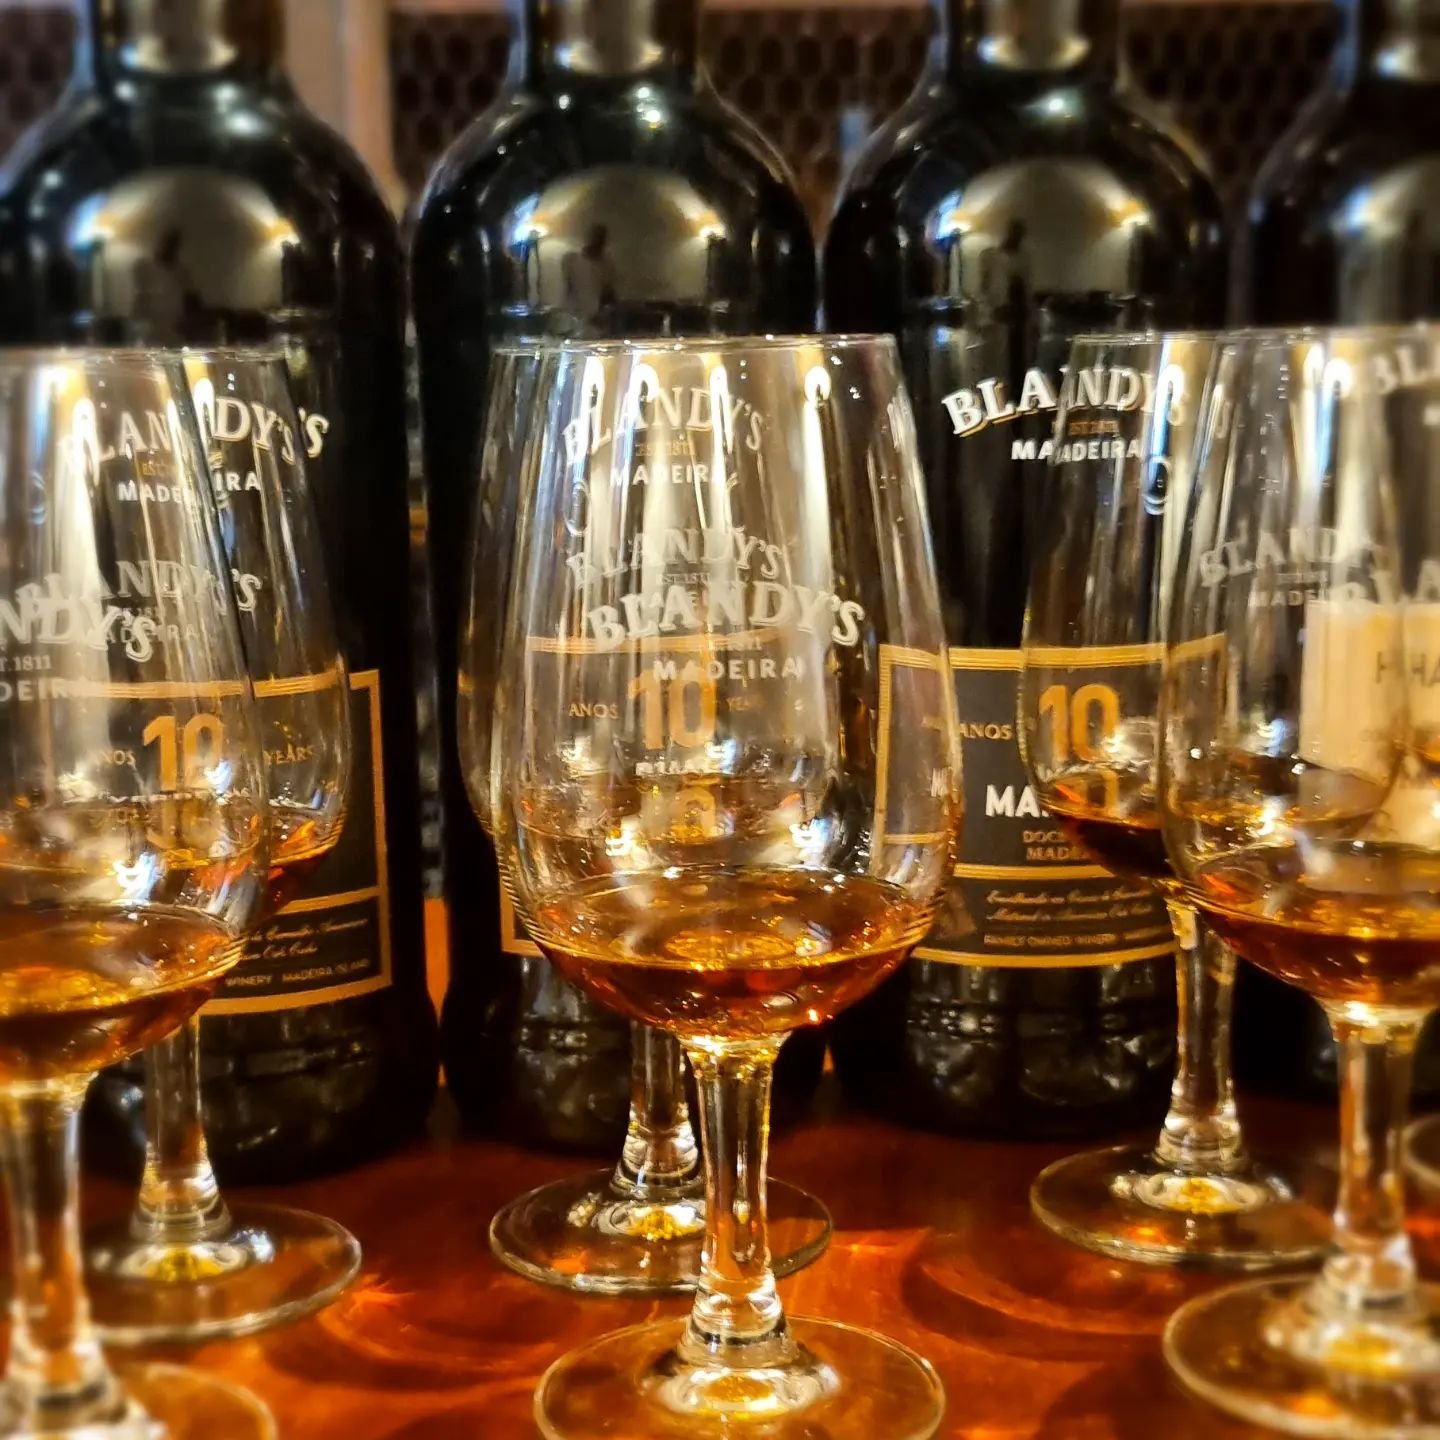 Great experience and fabulous tasting @blandysmadeirawine Wine Lodge in Funchal. Many thanks @sarahsymington_london and @je_fells for arranging. Very memorable and recommended. #blandys #madeira #blandysmadeira